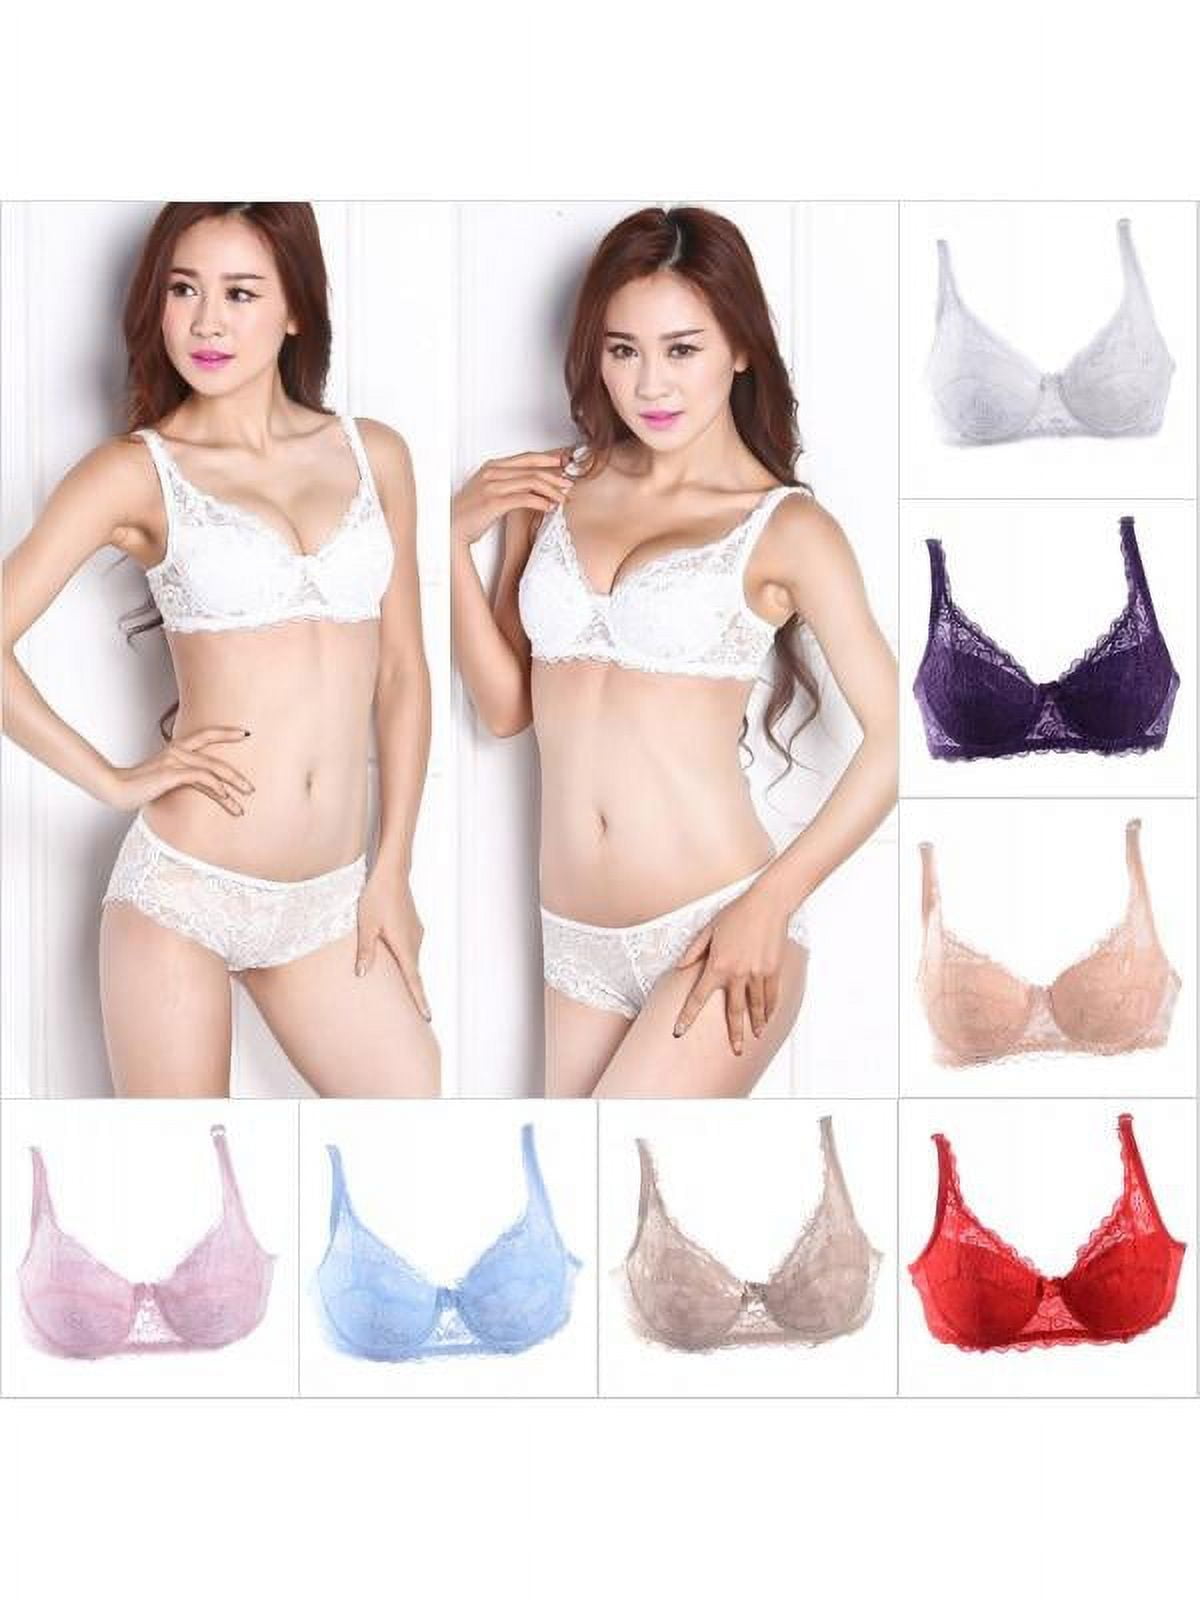 Women Sexy Lace Bra Underwire Push Up Lace Bralettes Padded Lace Bralettes  Bandeau Bra,Cute 3/4 Cover Multi-color Everyday Bra,Adjustable Strap